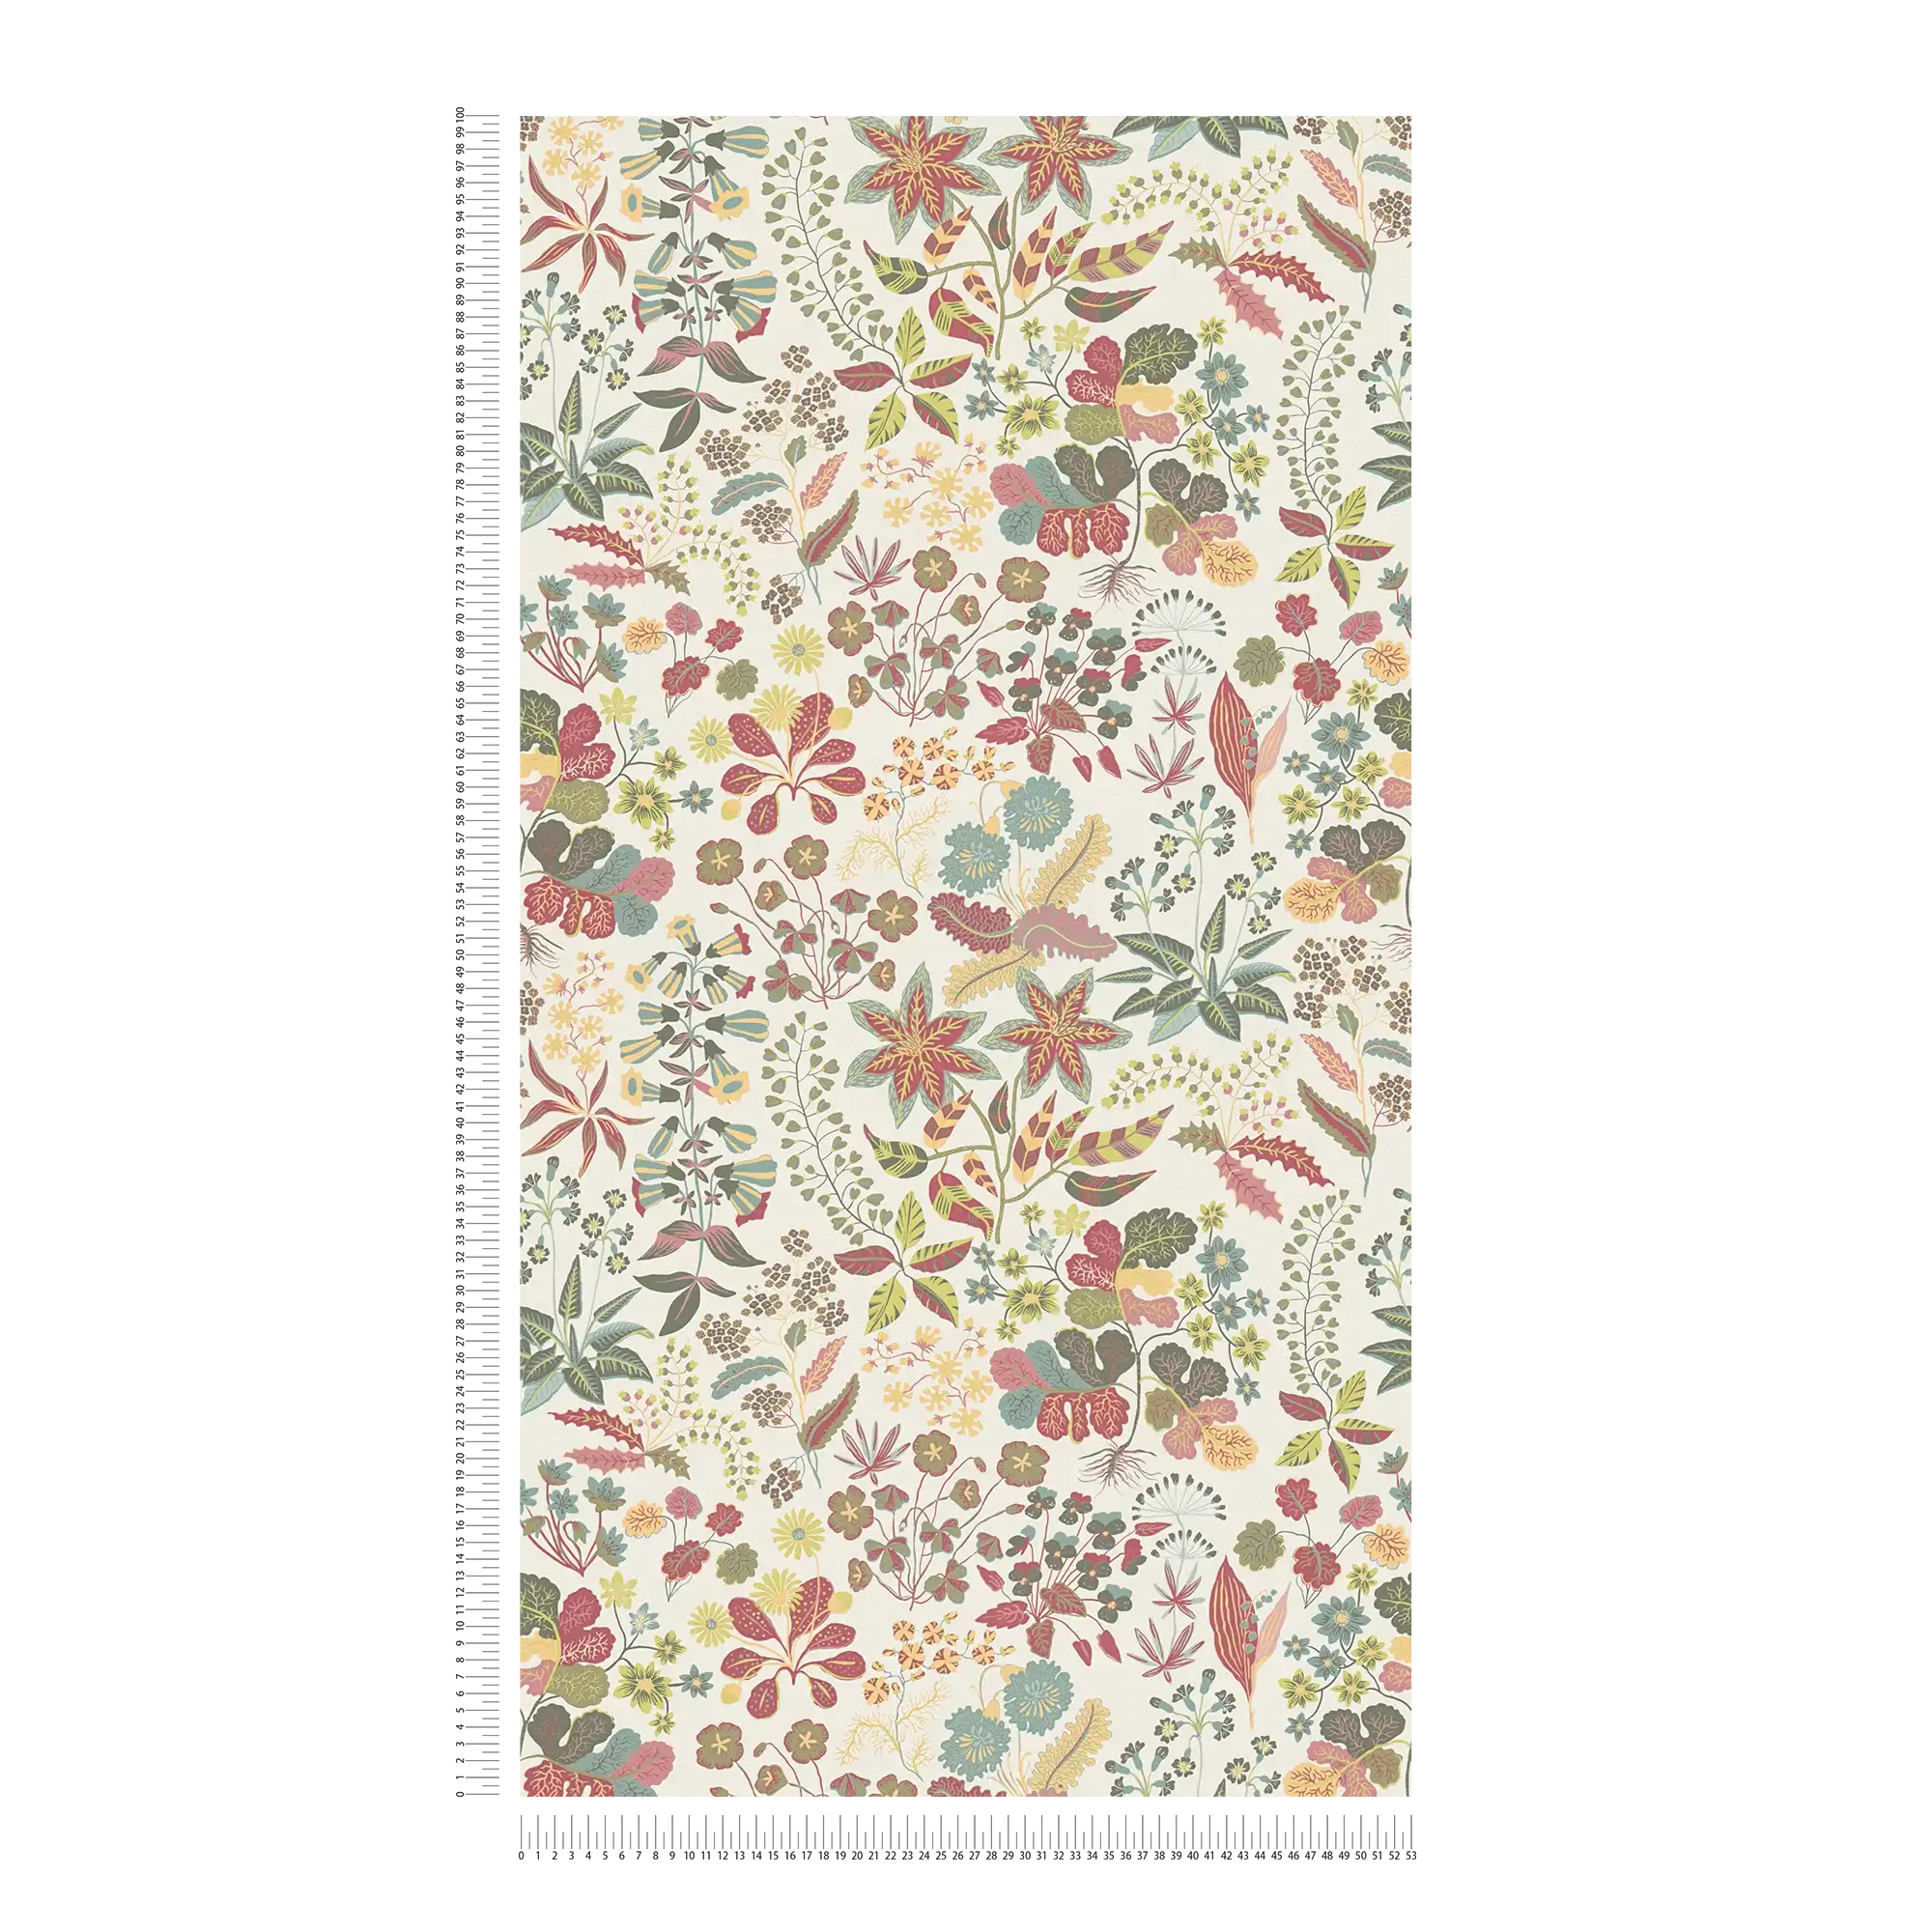             Floral wallpaper with detailed pattern - red, green, cream
        